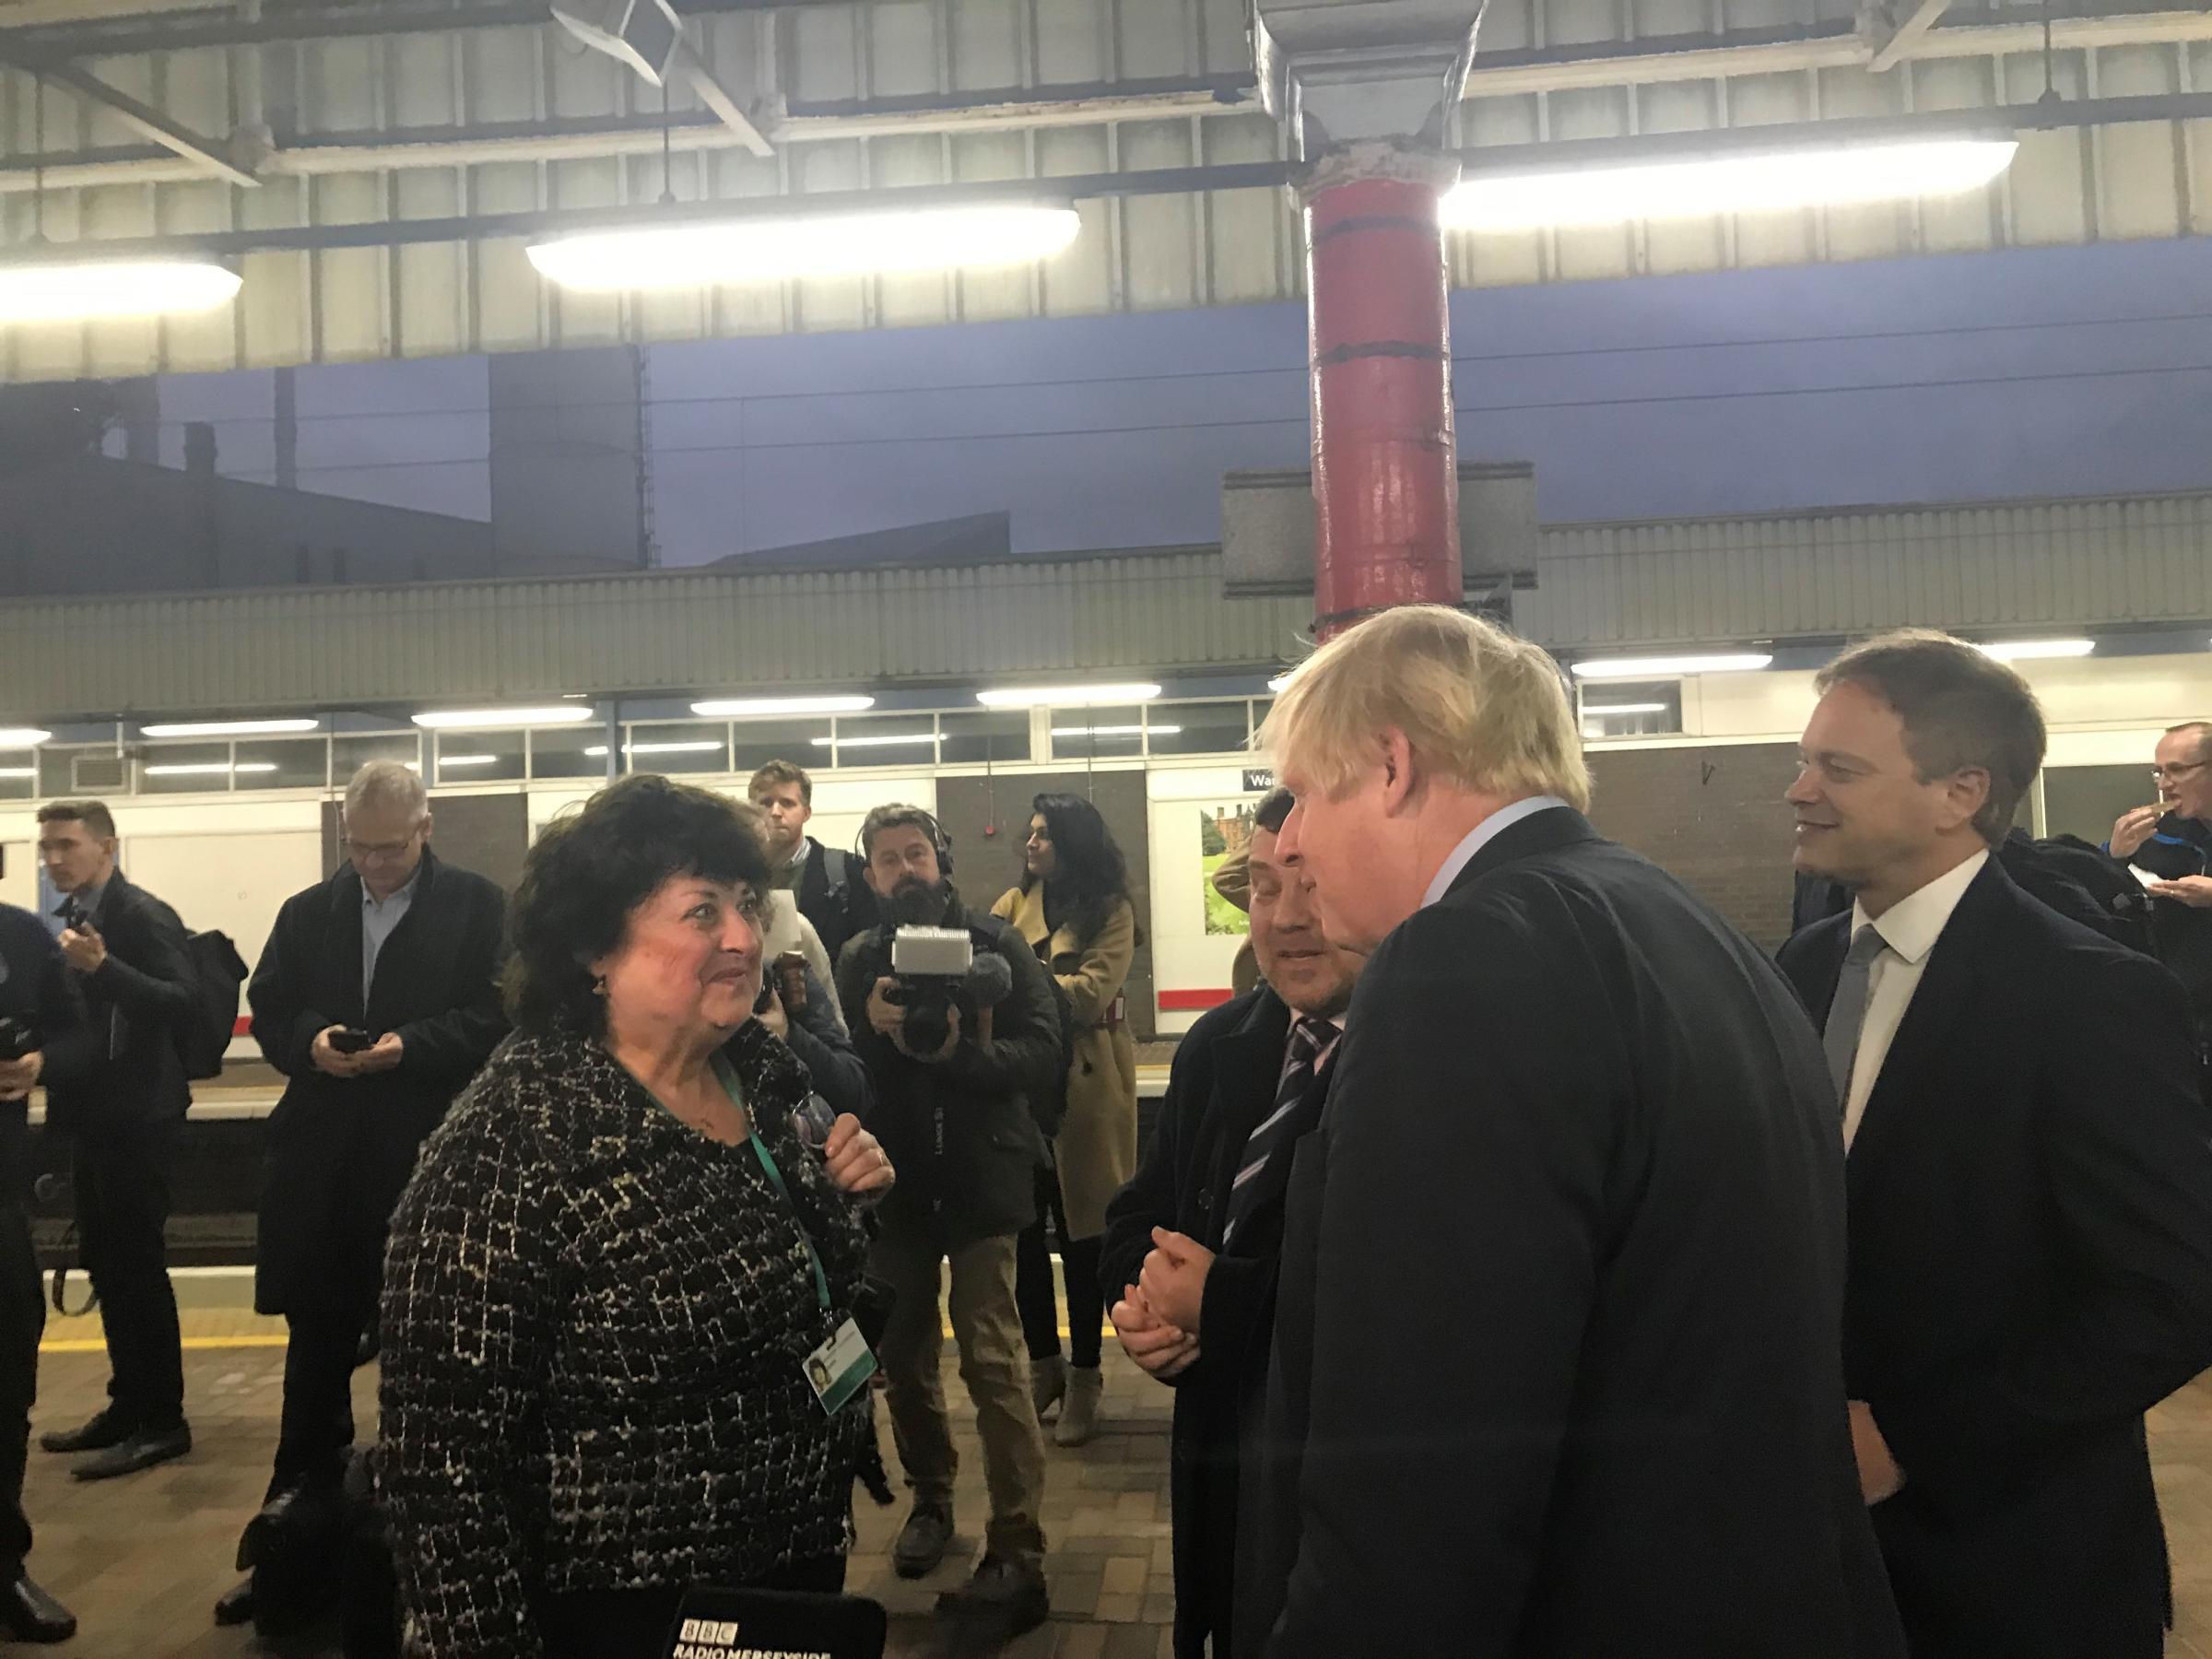 Mr Johnson spoke with Cllr Kath Buckley and Andy Carter MP at Bank Quay station